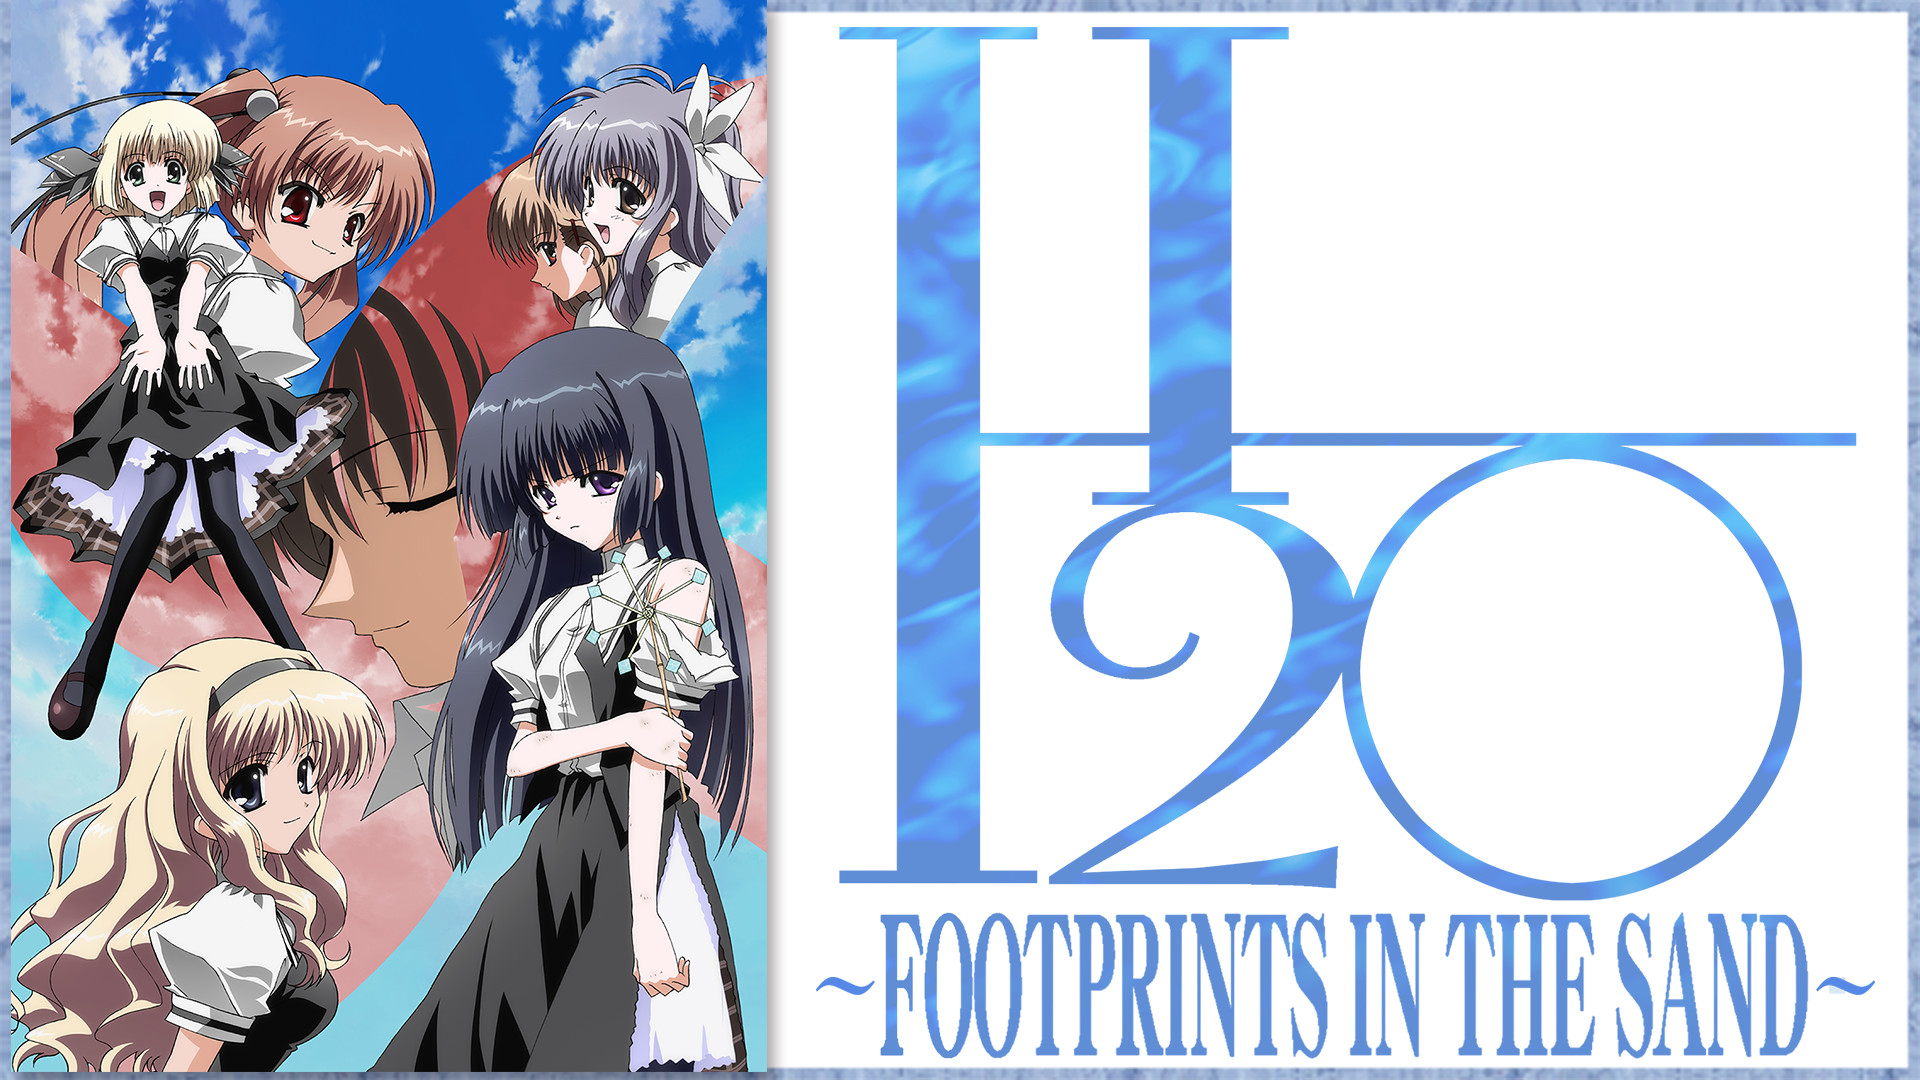 H2O ～FOOTPRINTS IN THE SAND～ | アニメ動画見放題 | dアニメストア